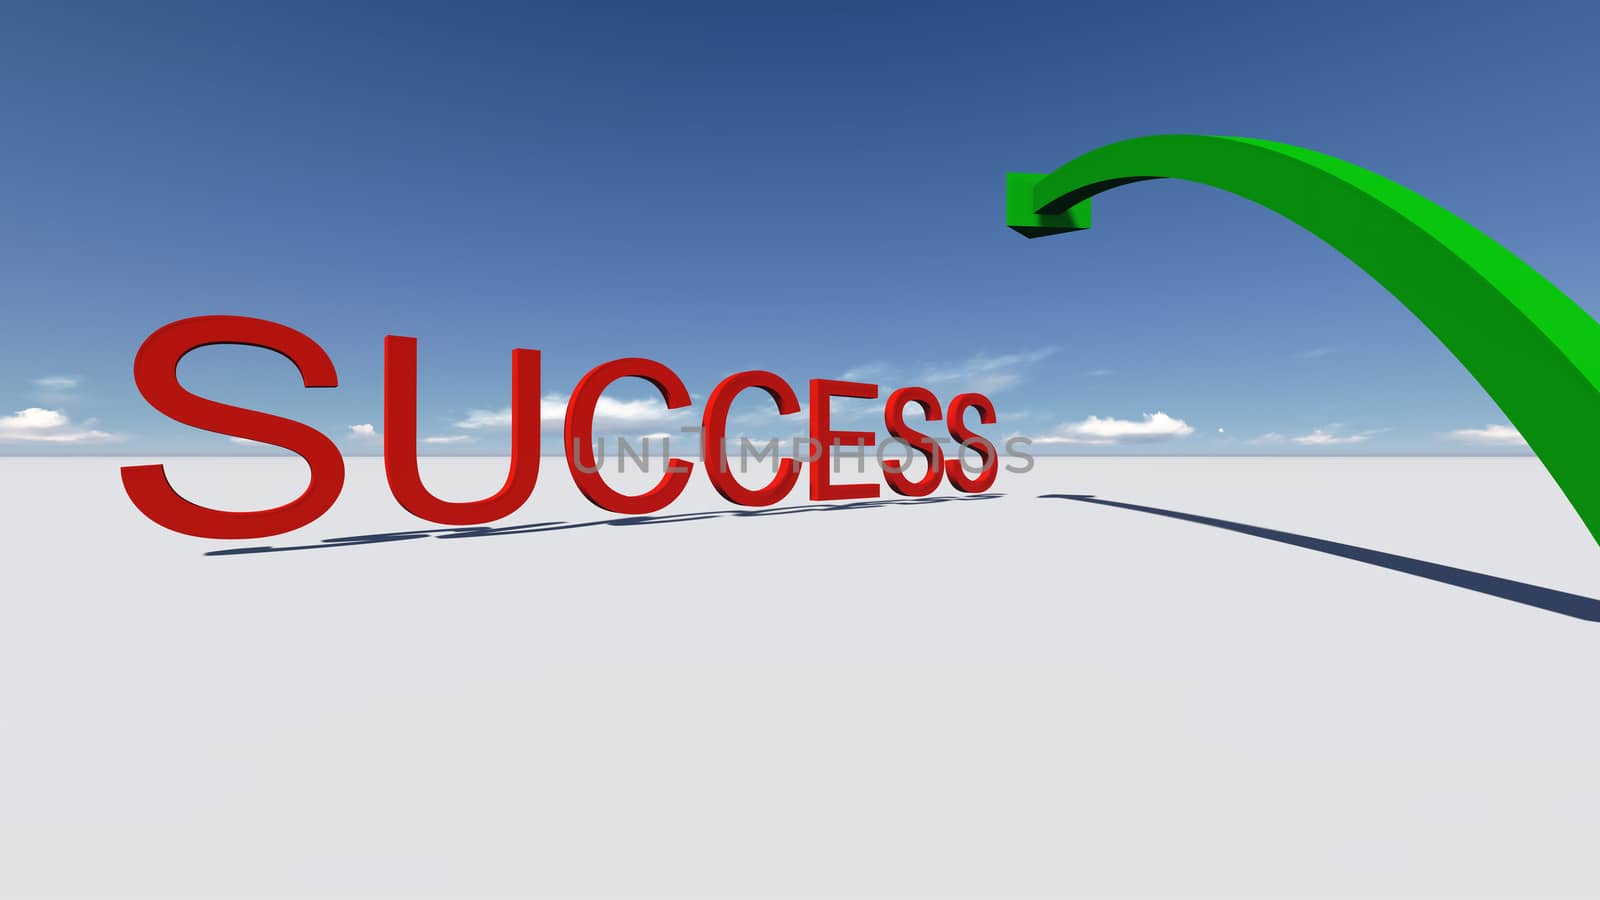 Success this way.Made in 3d software